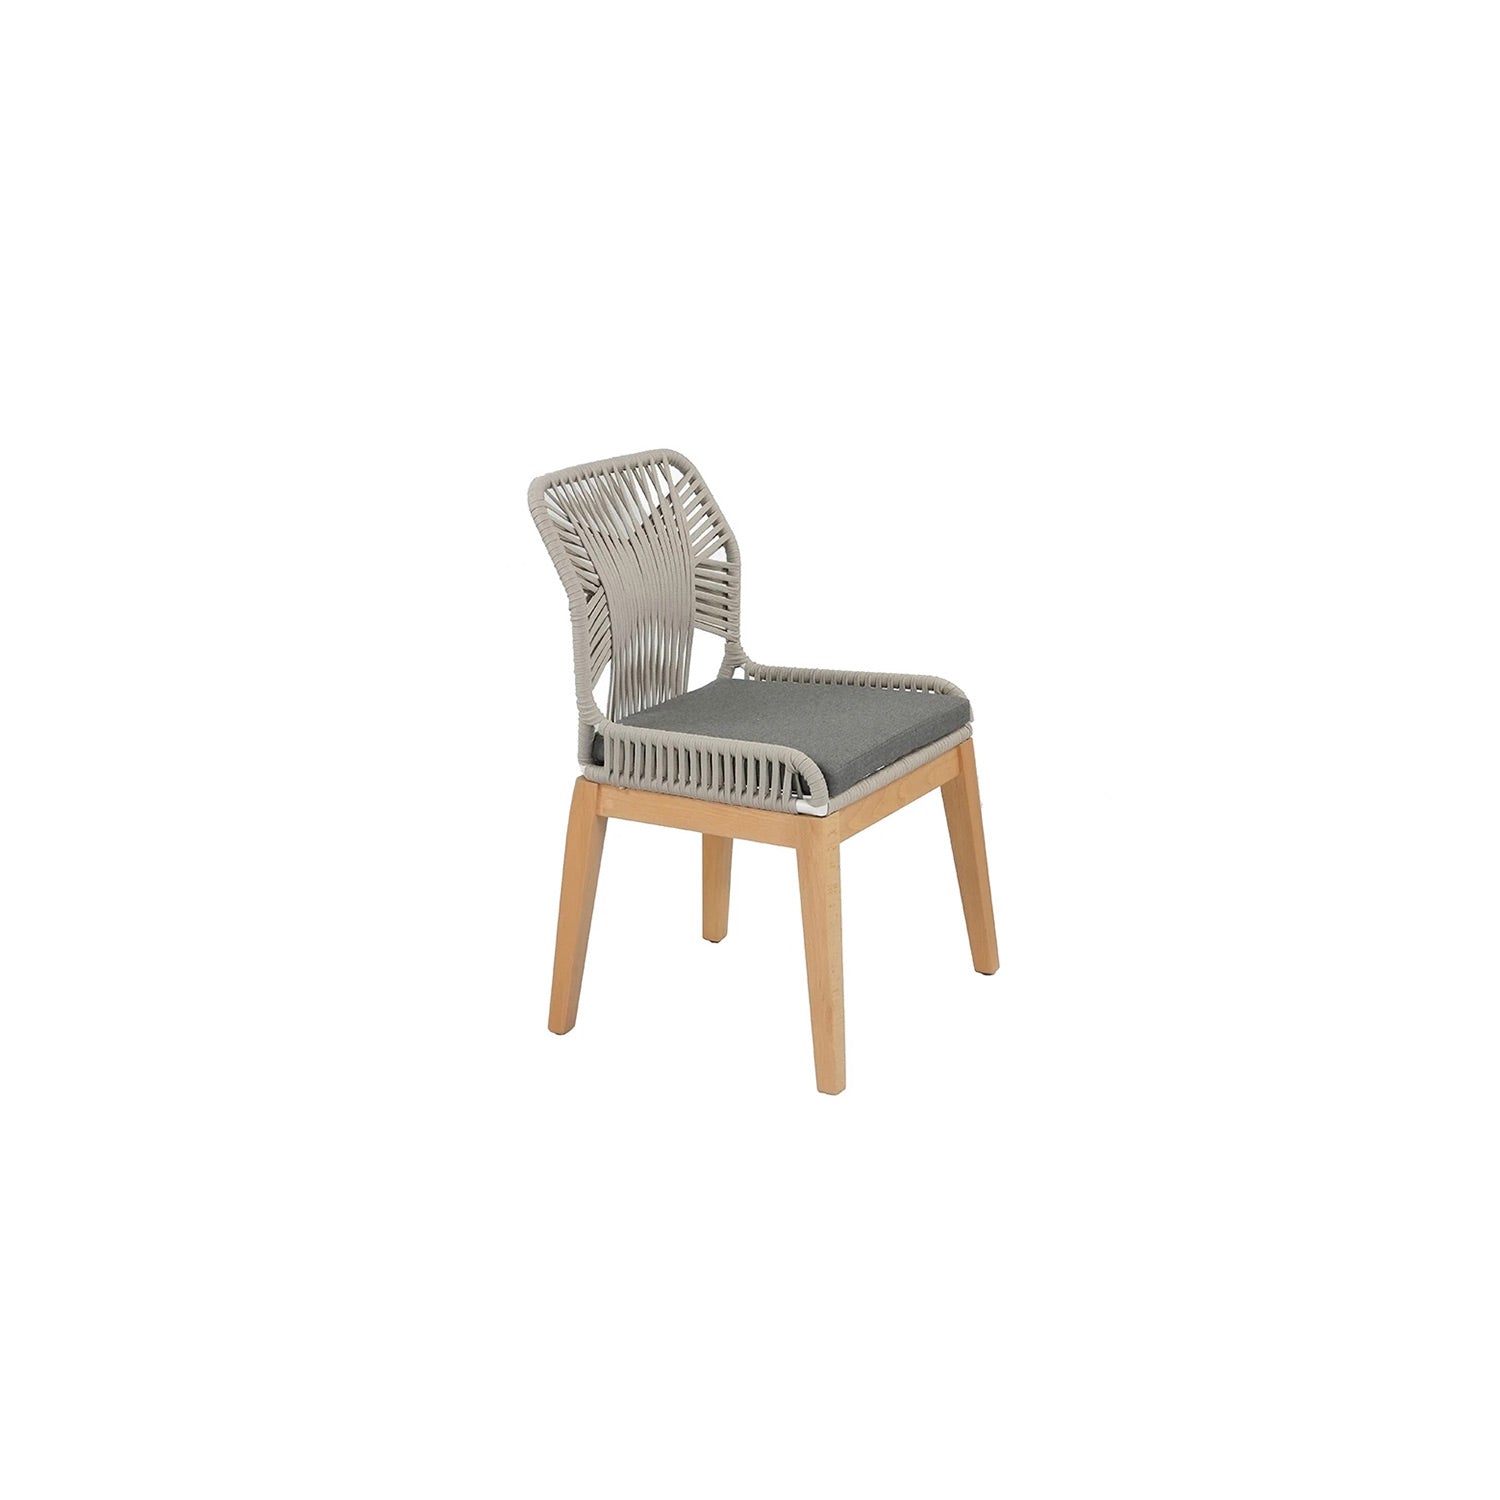 Nelson dining chair